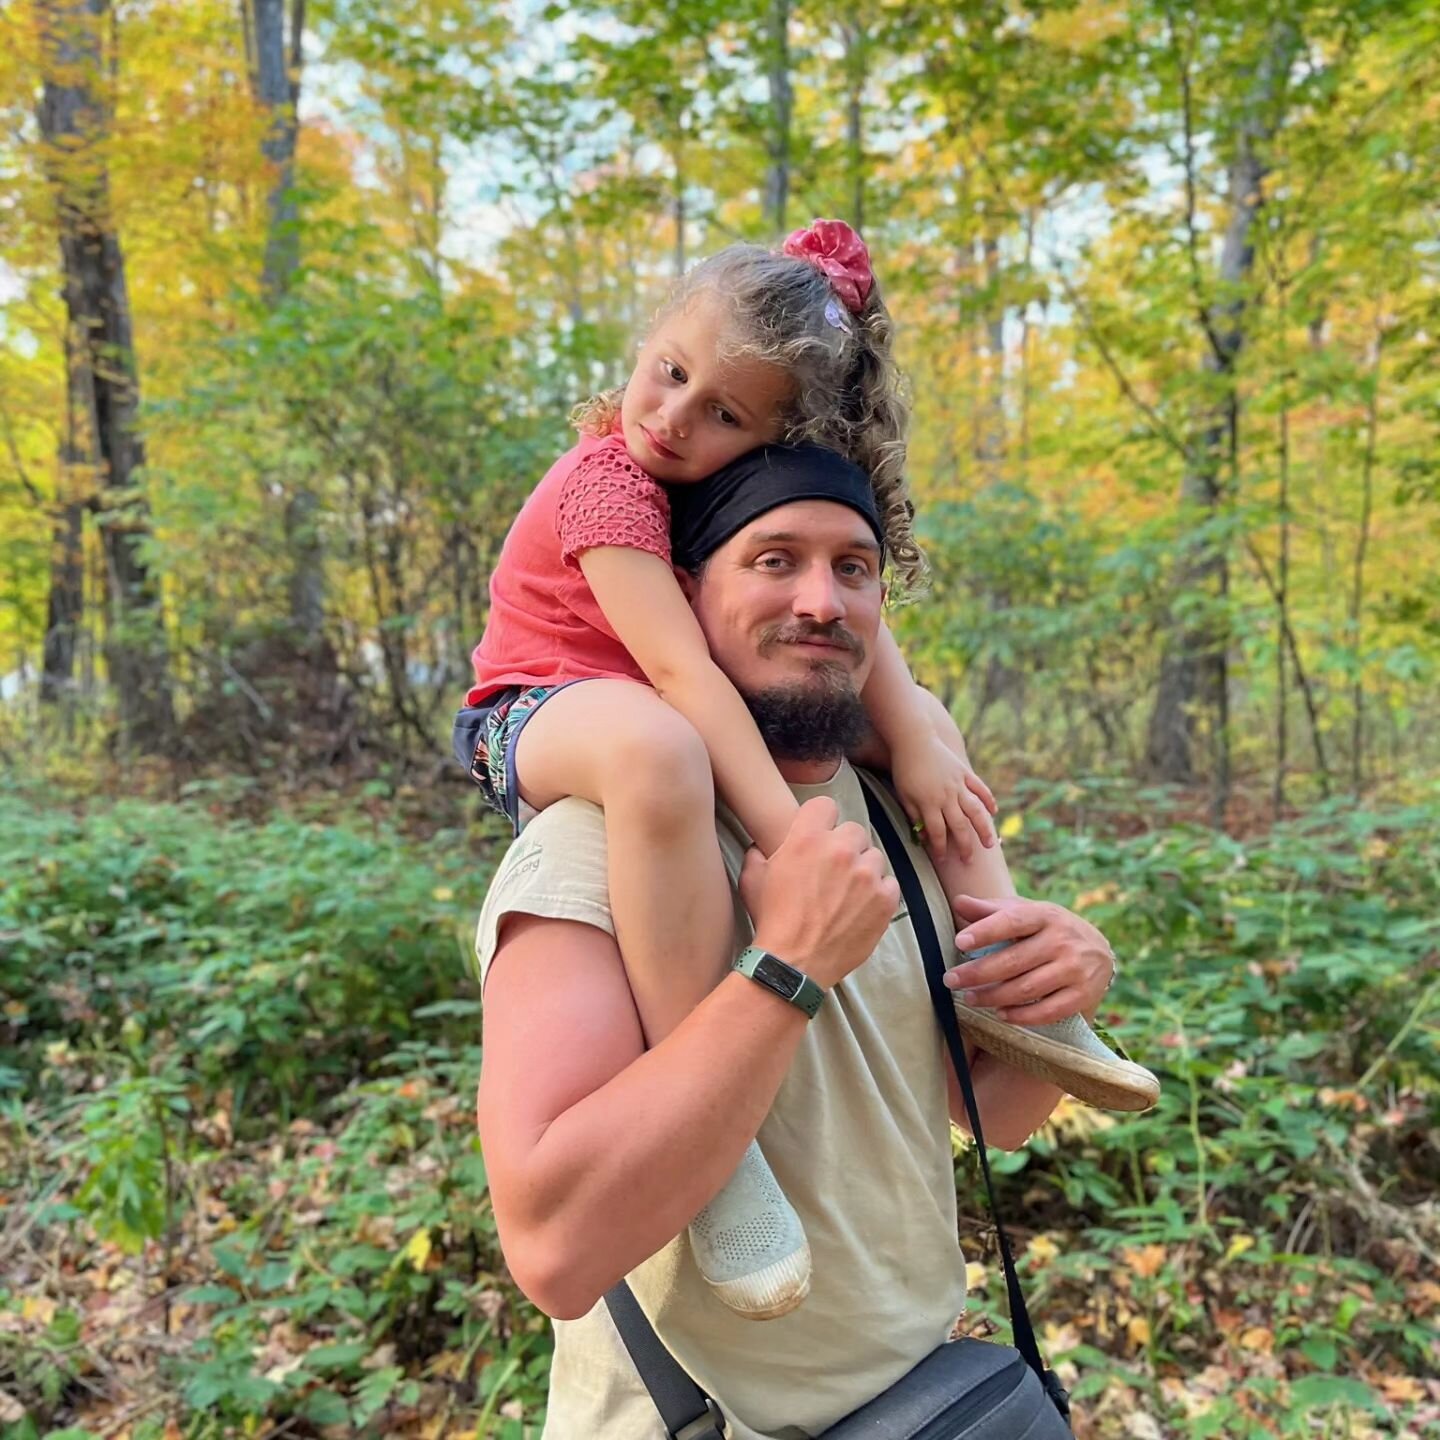 Hey, y'all.  I just posted an end of season trout video on YouTube, and I think I did a decent job on it.  Give it a look if you have a moment.

On a side note, this weather let me get out into the woods with my daughter tonight.  We found some honey